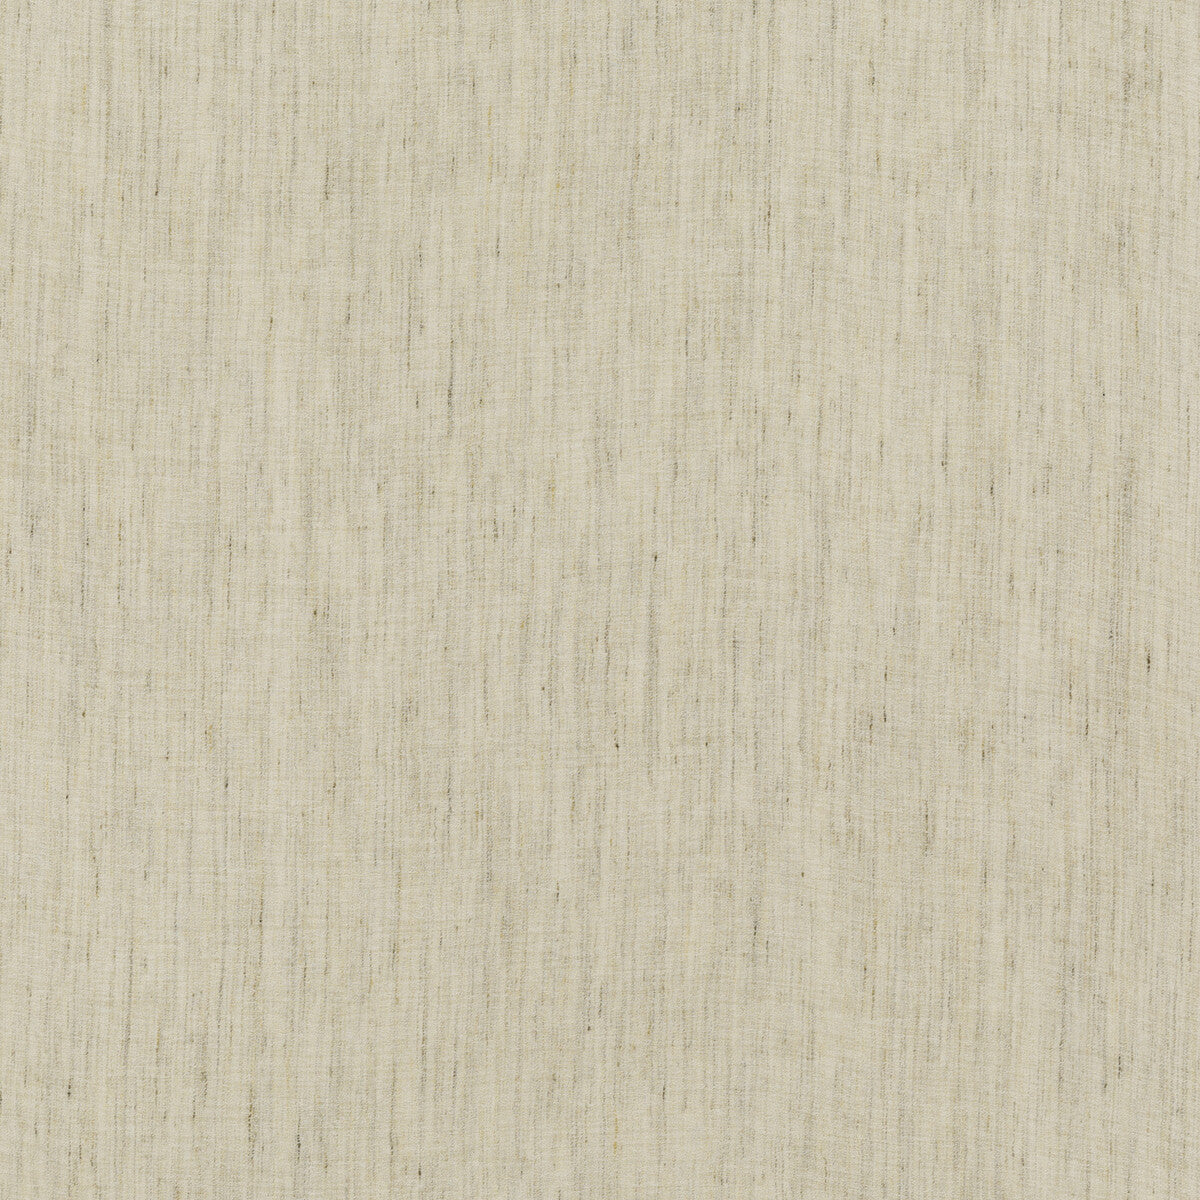 Atacama fabric in parchment color - pattern ED95014.118.0 - by Threads in the Meridian collection